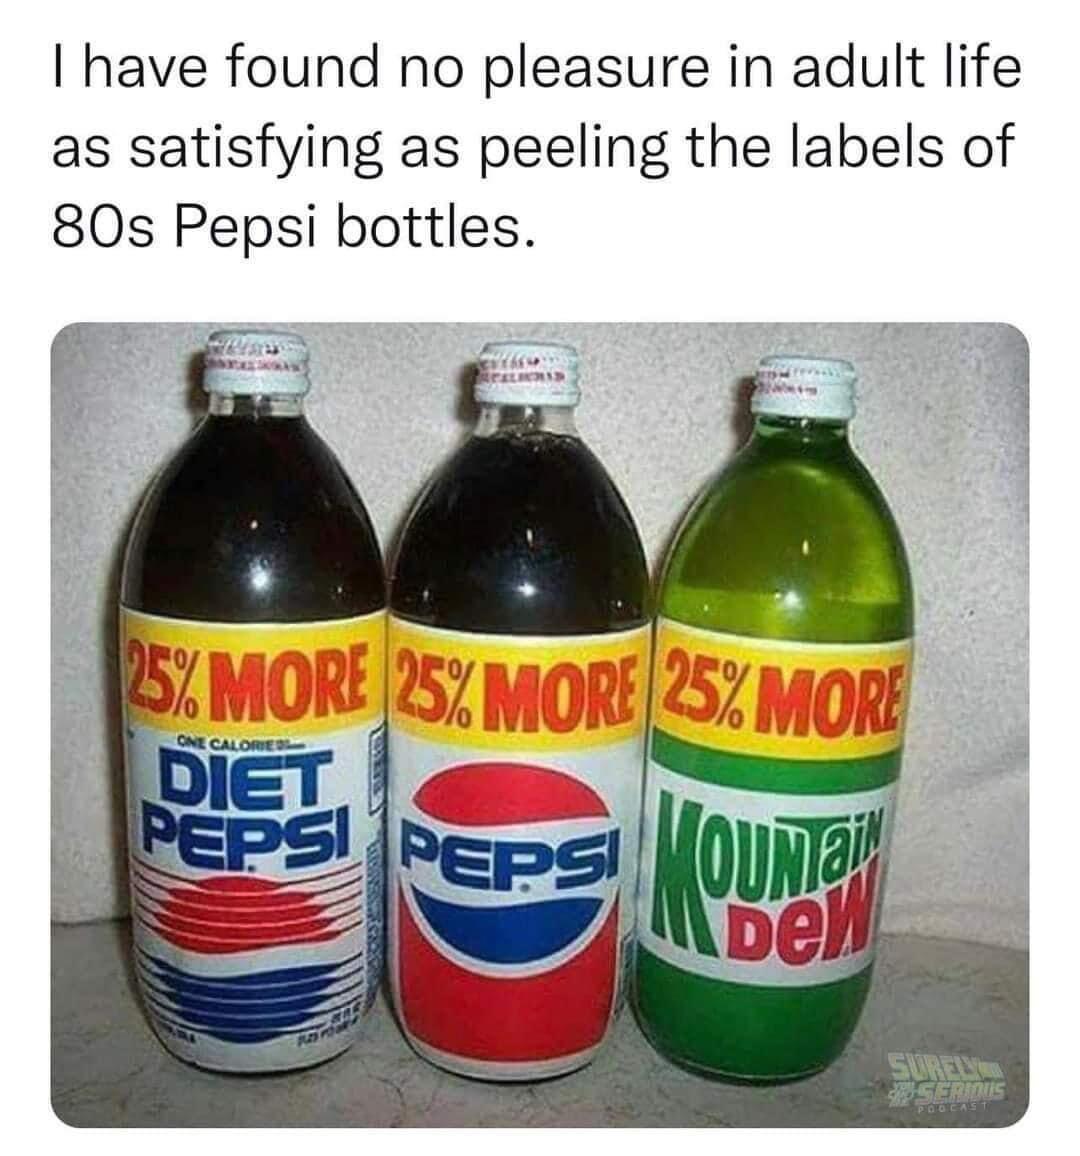 dank memes - bottle - I have found no pleasure in adult life as satisfying as peeling the labels of 80s Pepsi bottles. Eliorad rew 25% More 25% More 25% More One Calories Diet Pepsi Pepsi Moun Dew Surely Serious Podcast